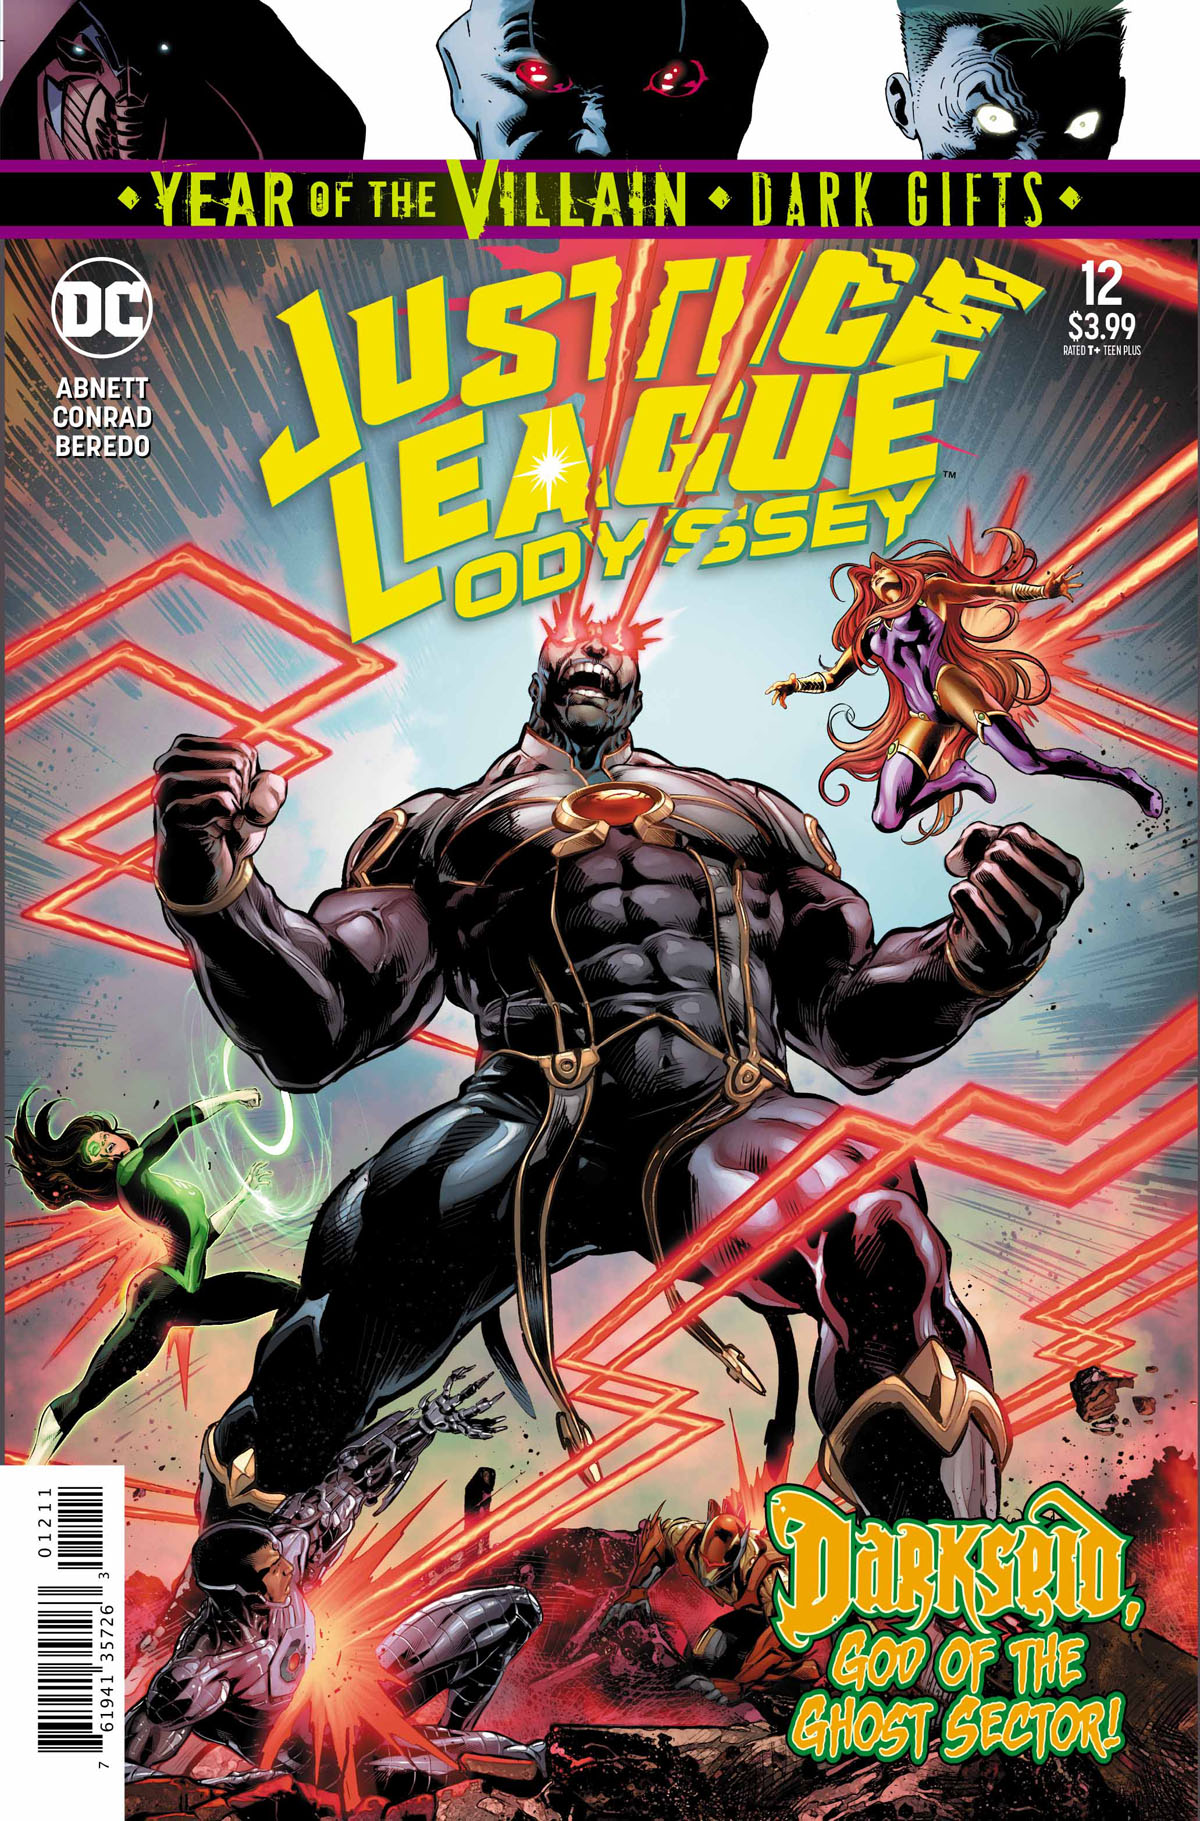 Justice League Odyssey #12 cover